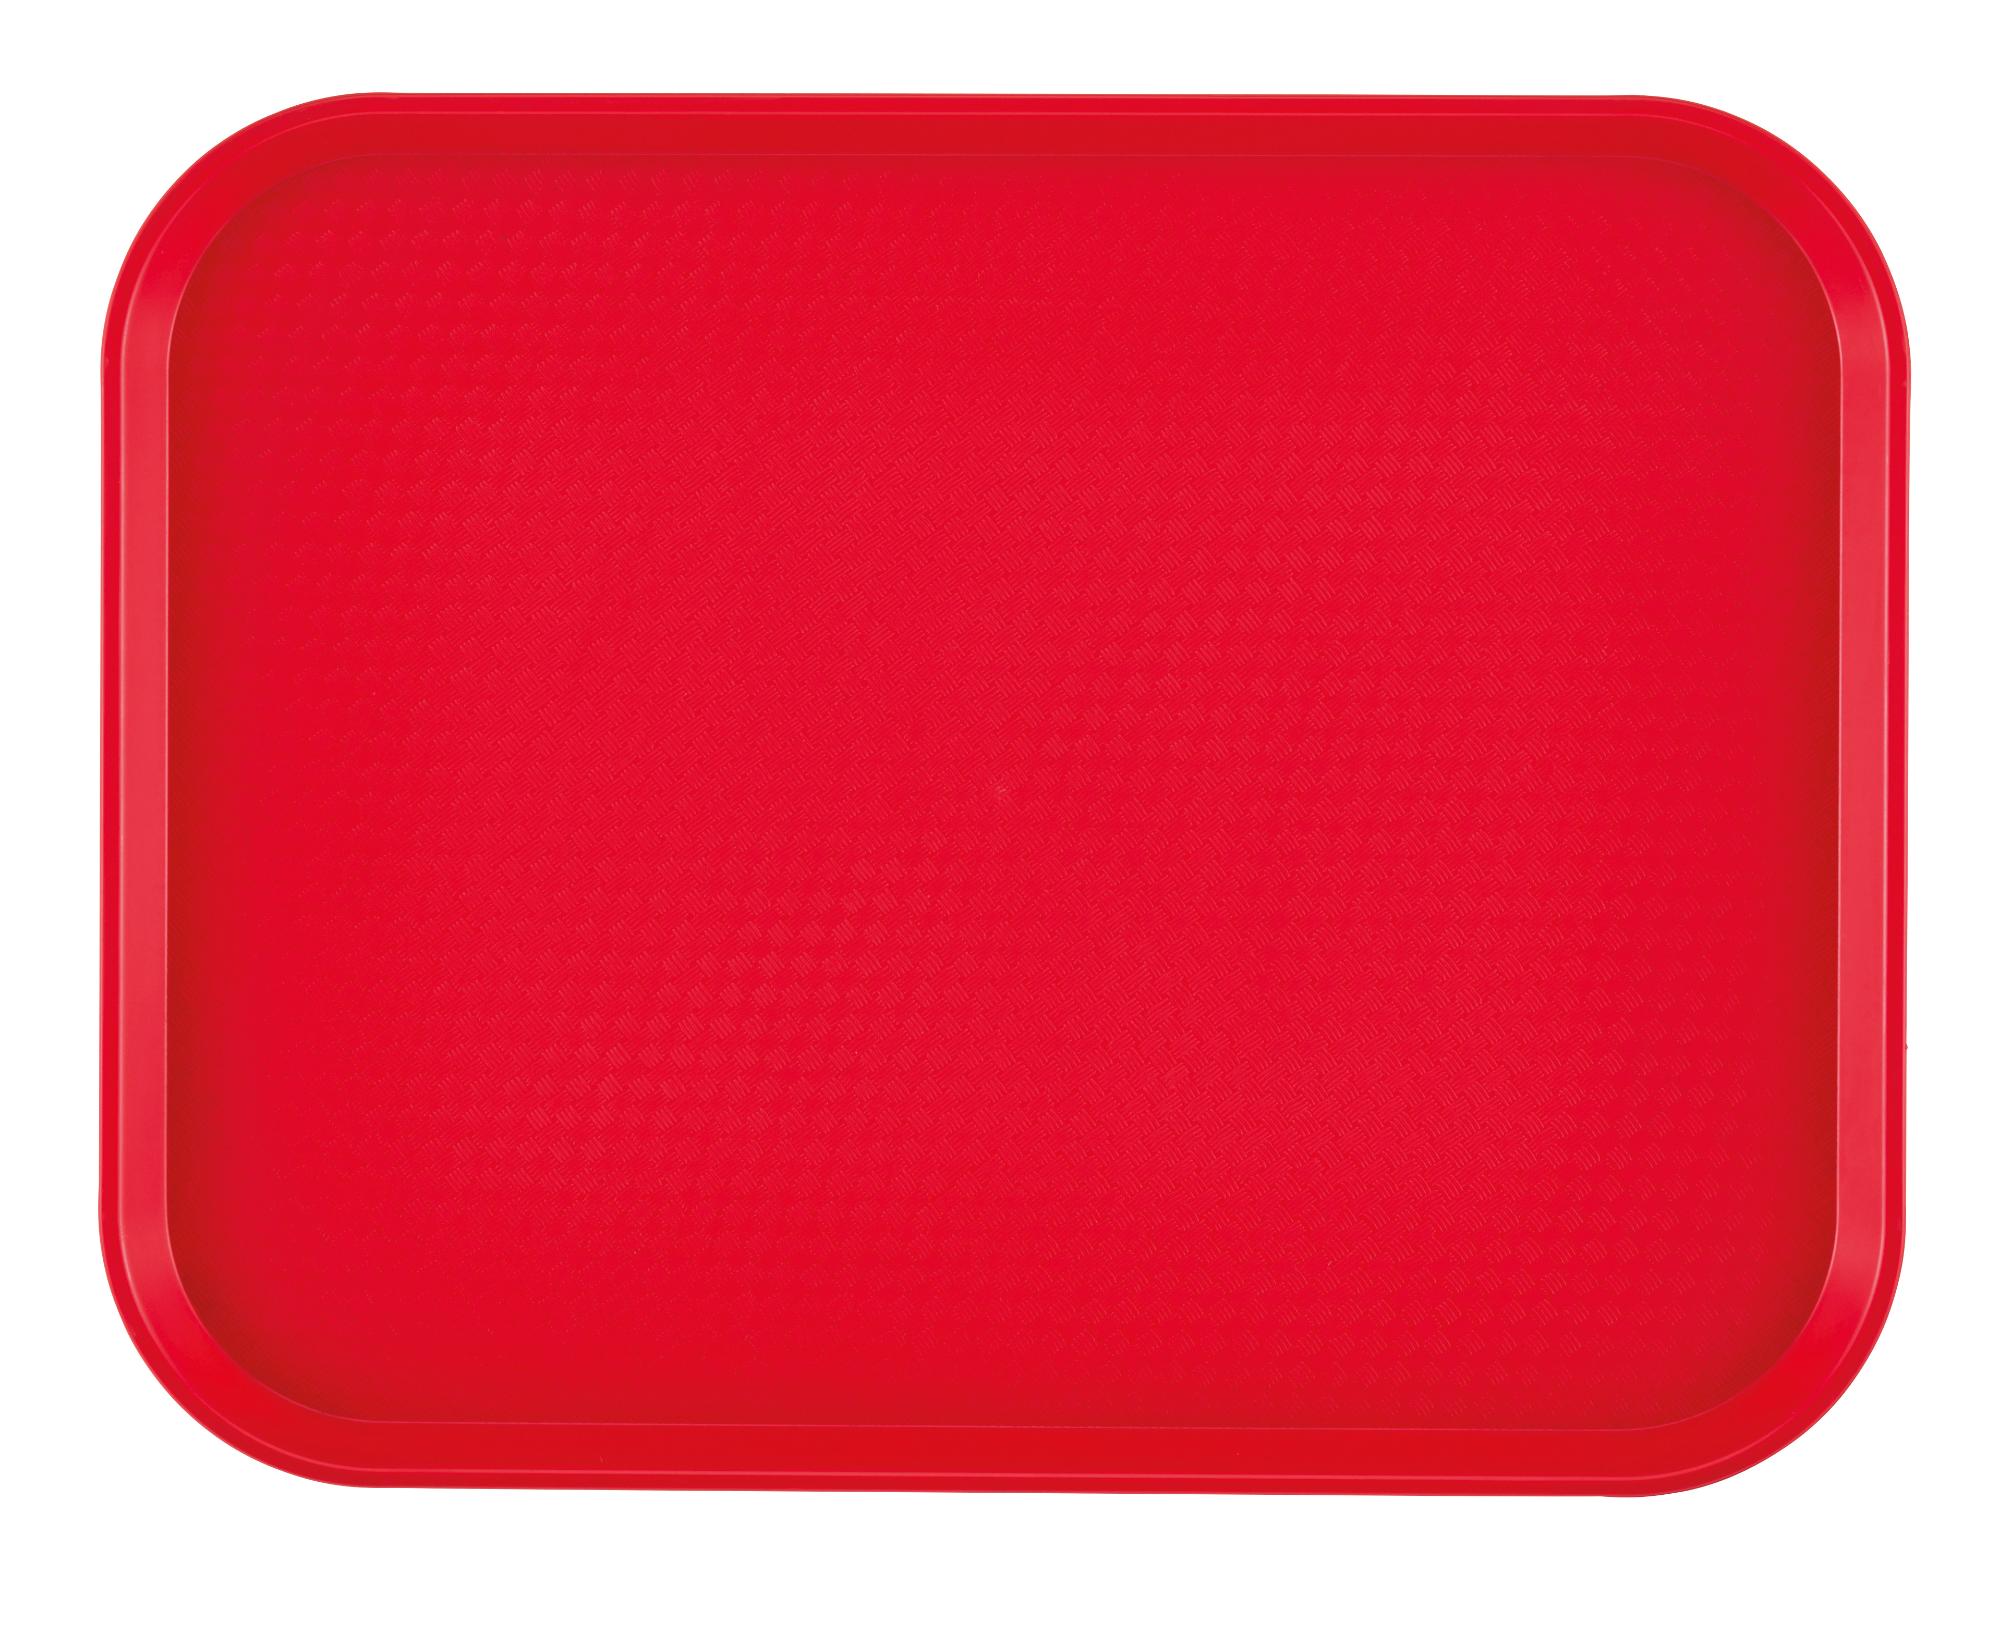 Fast Food polypropylene tray, textured surface, red, 355x457 mm